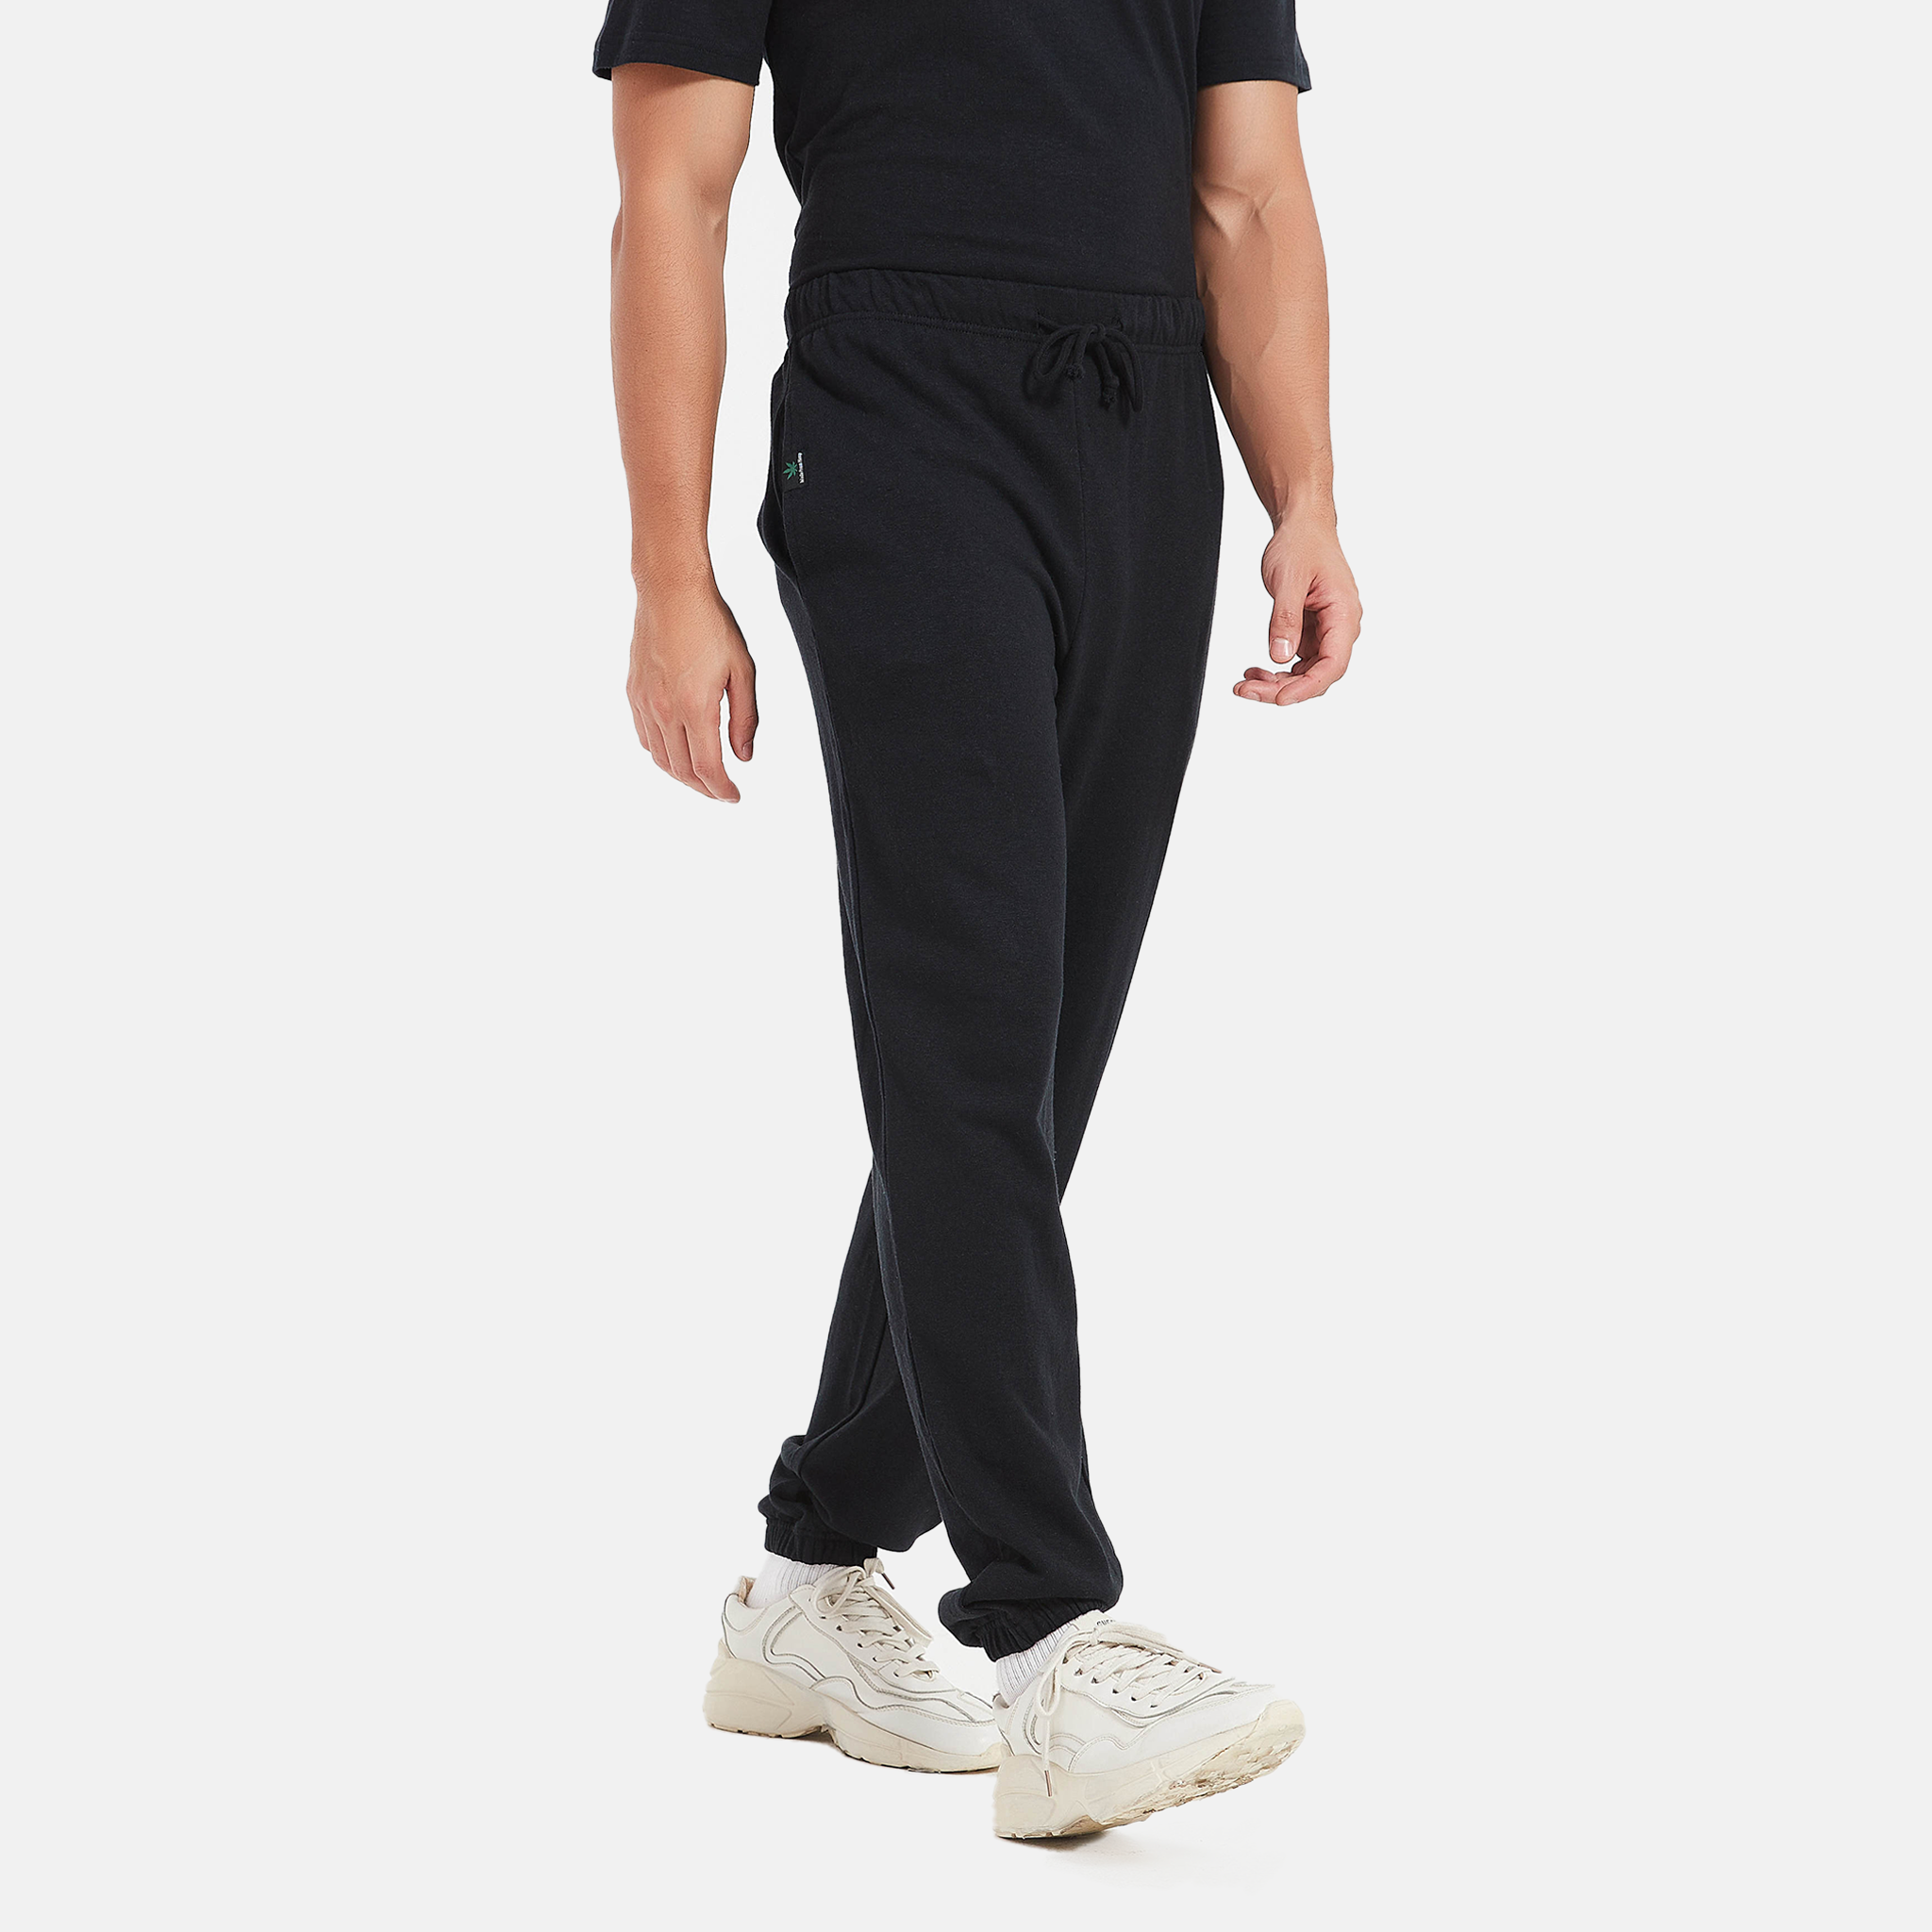 Organic Cotton Sweatpants in Black, Sustainable Loungewear Essential, Mens and Womens